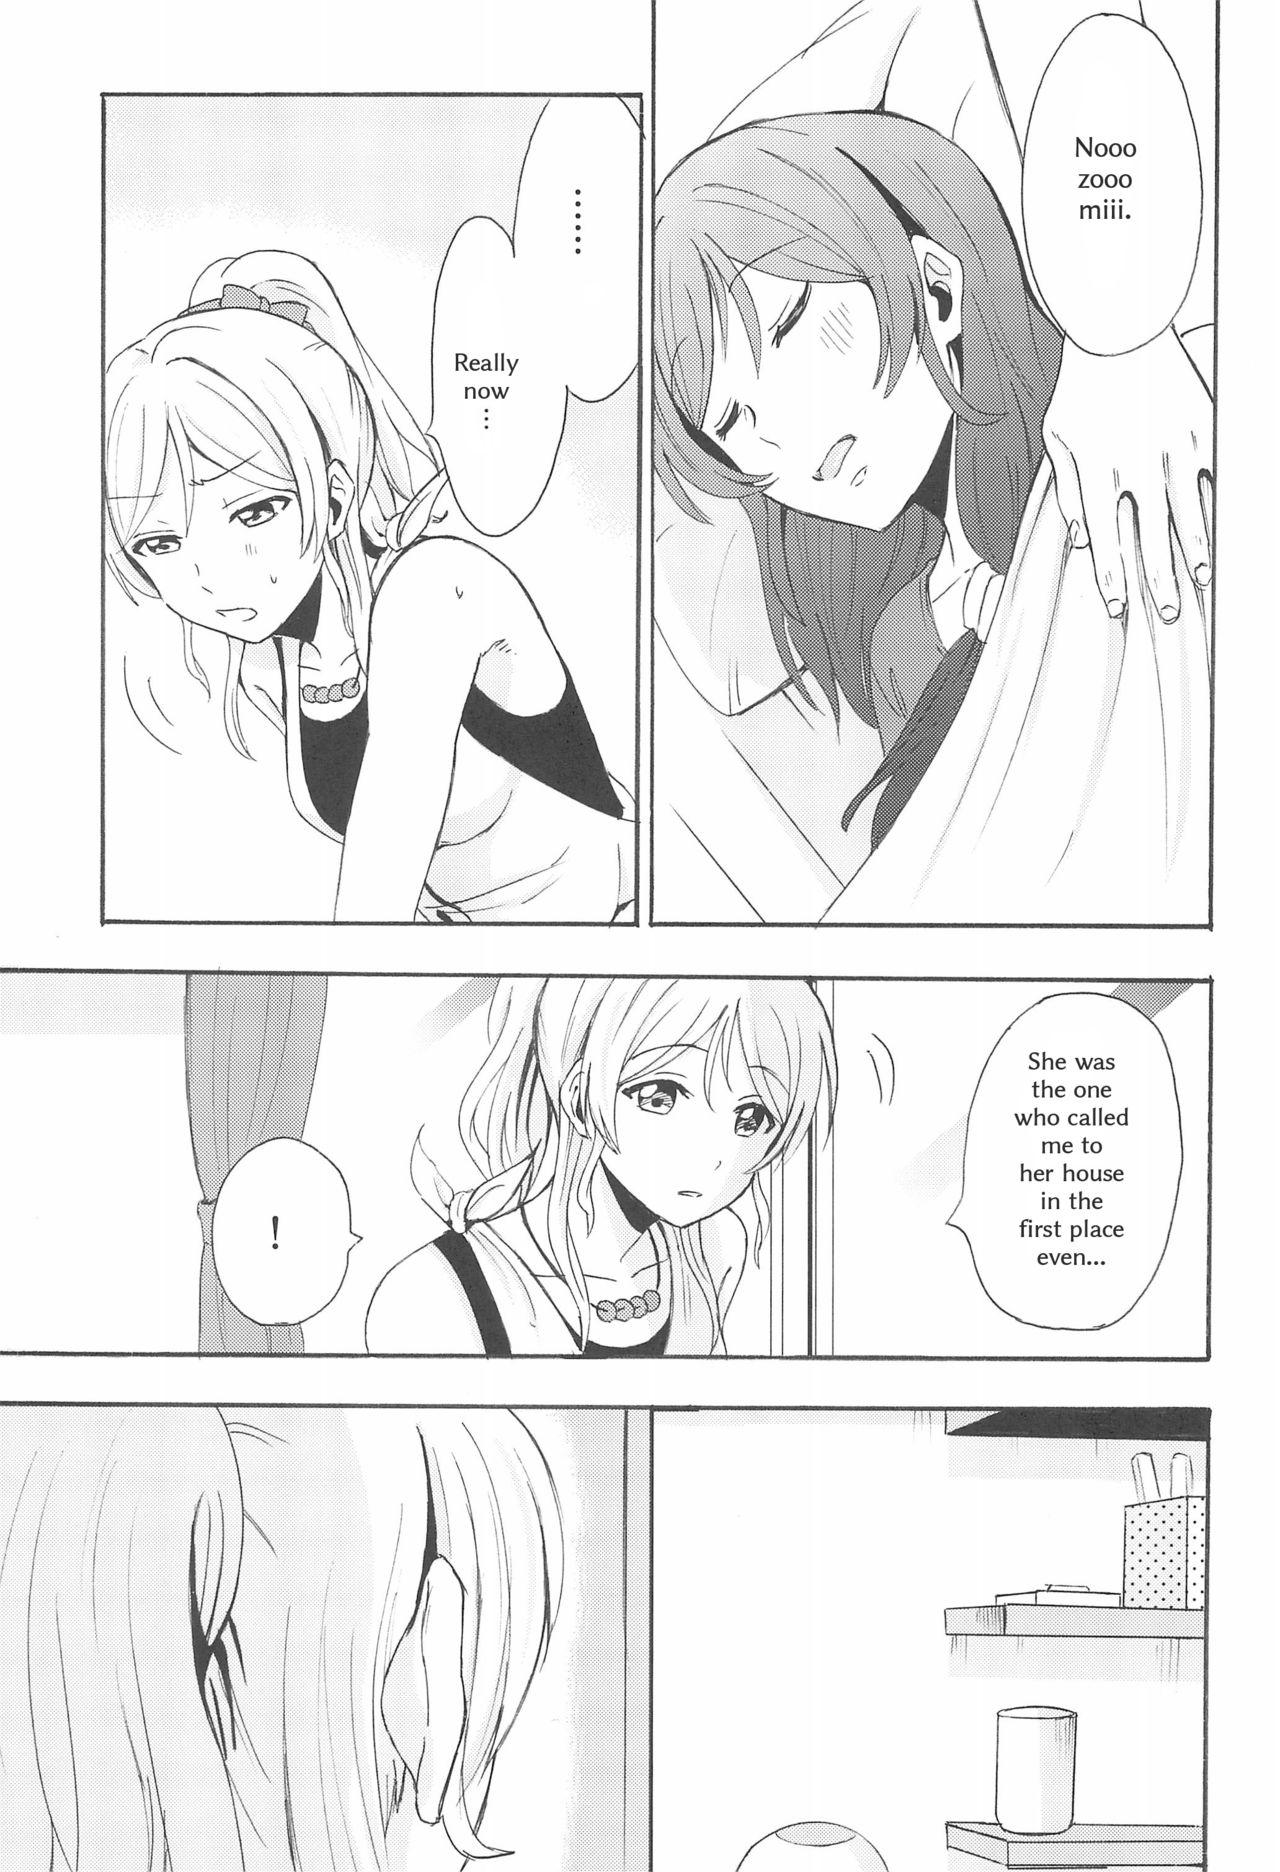 Old And Young LONELINESS - Love live Hot Chicks Fucking - Page 8